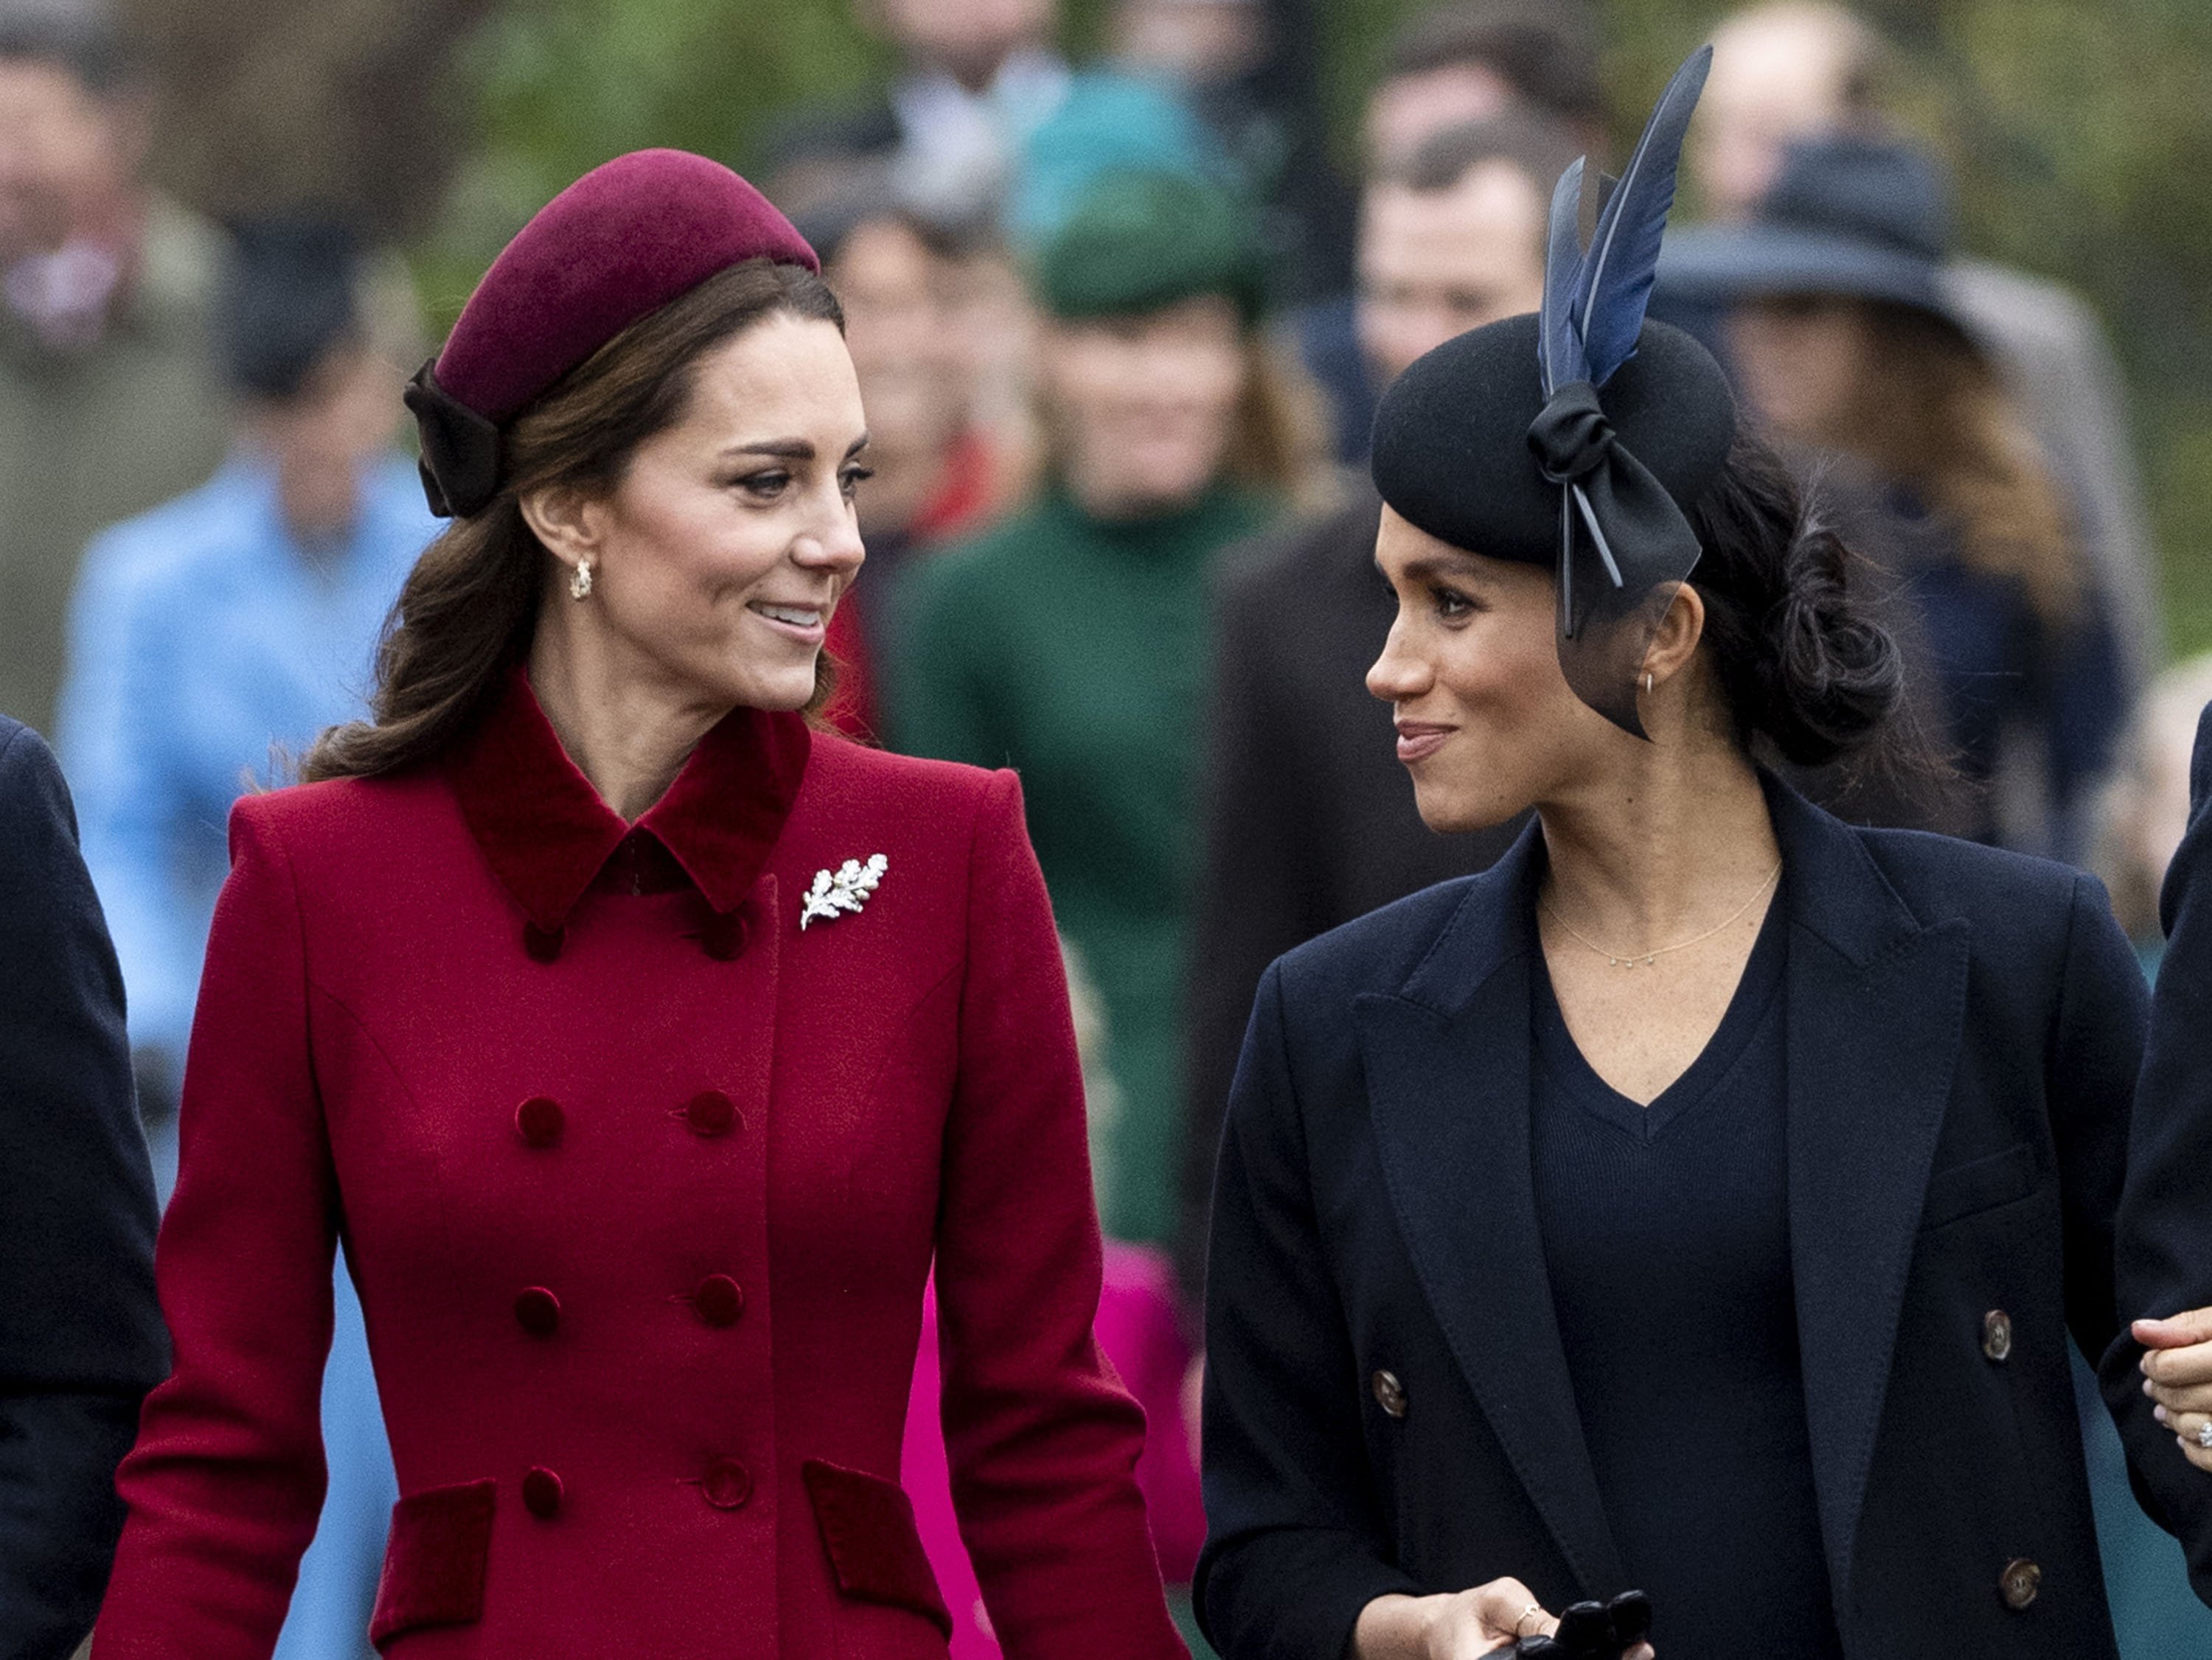 Kate Middleton, Duchess of Cambridge and Meghan Markle, Duchess of Sussex attending Christmas Day Church service at Church of St Mary Magdalene on the Sandringham estate on December 25, 2018 in King's Lynn, England. / Source: Getty Images